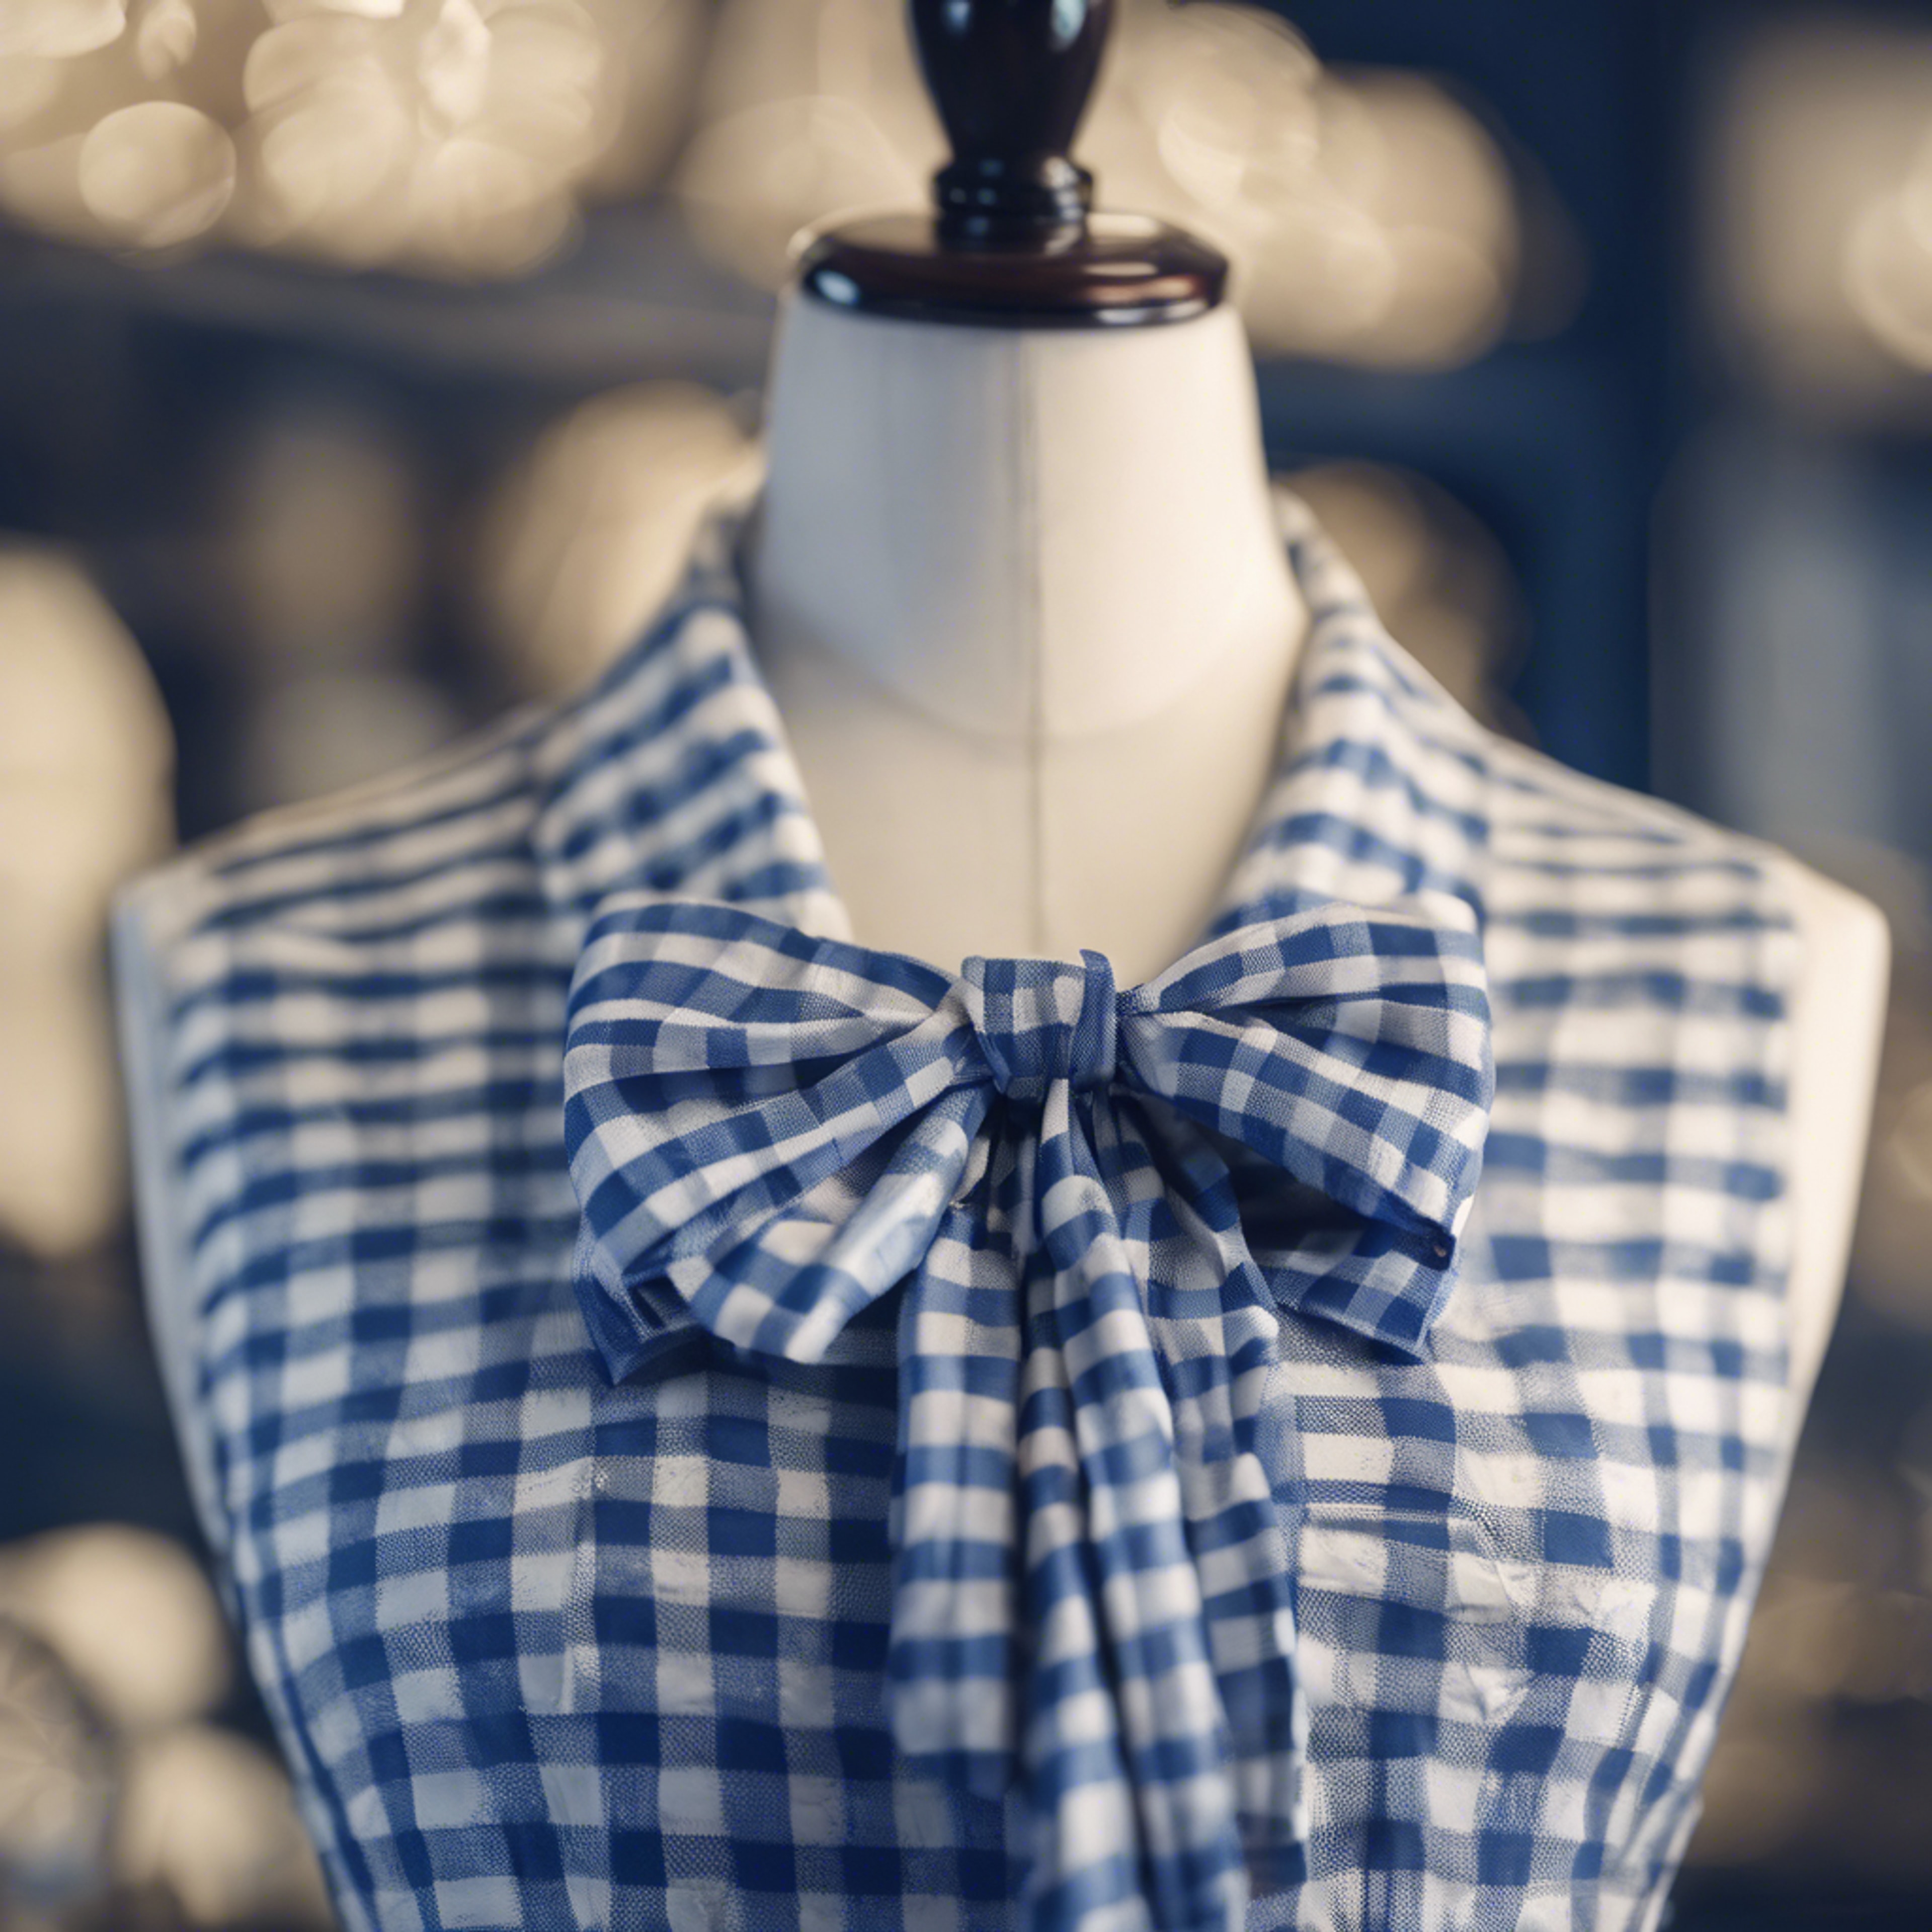 A preppy style blue and white chequered dress with a neatly tied bow on a mannequin.” 벽지[2cff79e4d79d40c780d3]